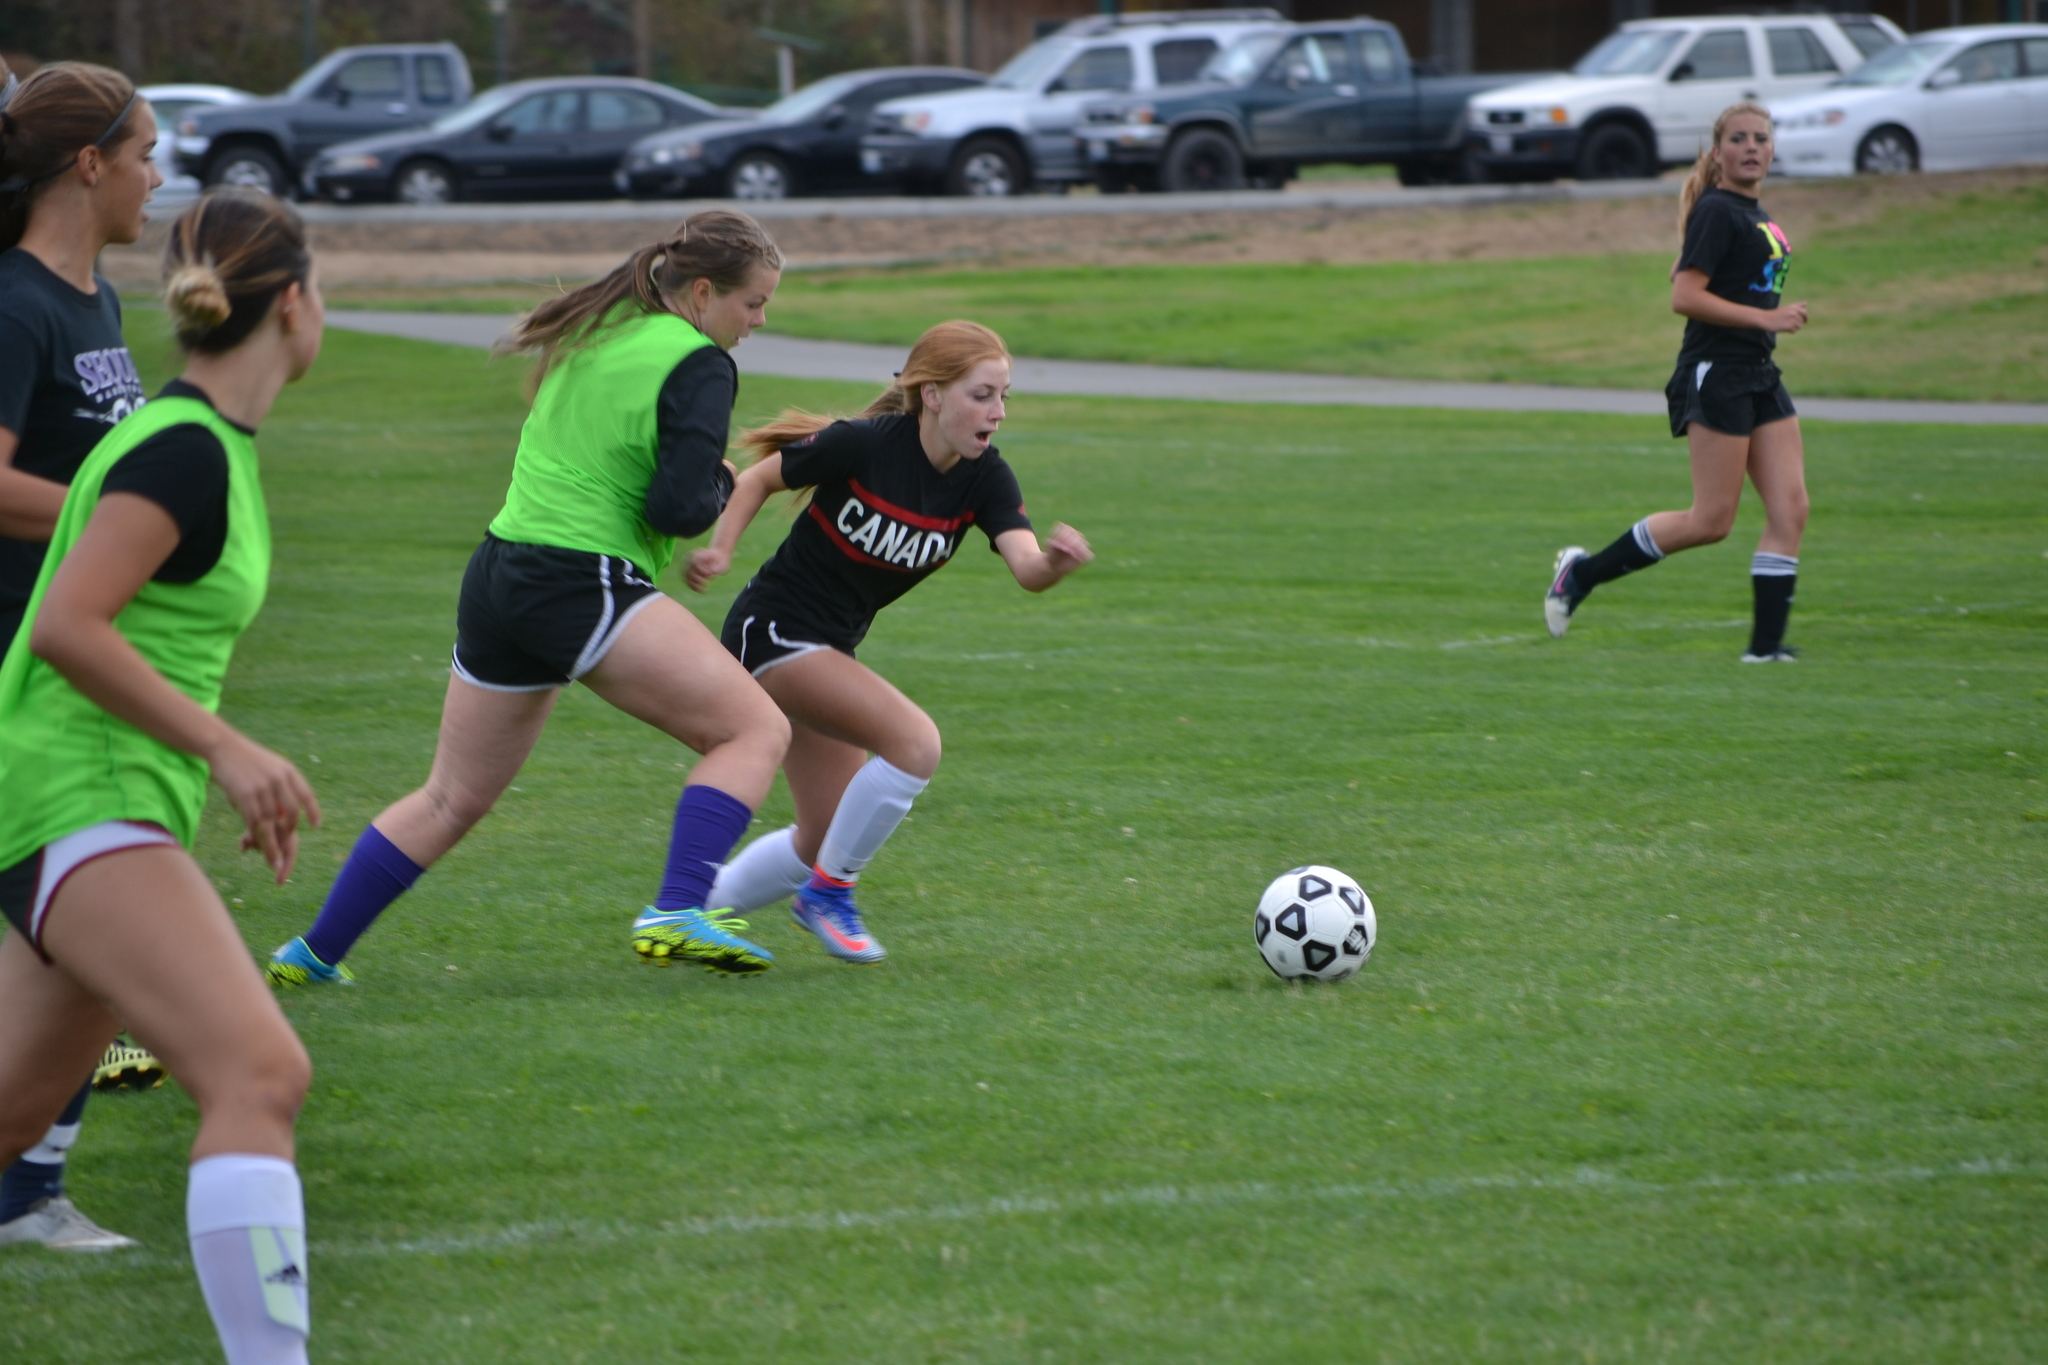 Daisy Ryan works the ball past defender Sarah Shea in a recent practice for the Lady Wolves soccer team. Sequim Gazette photo by Matthew Nash